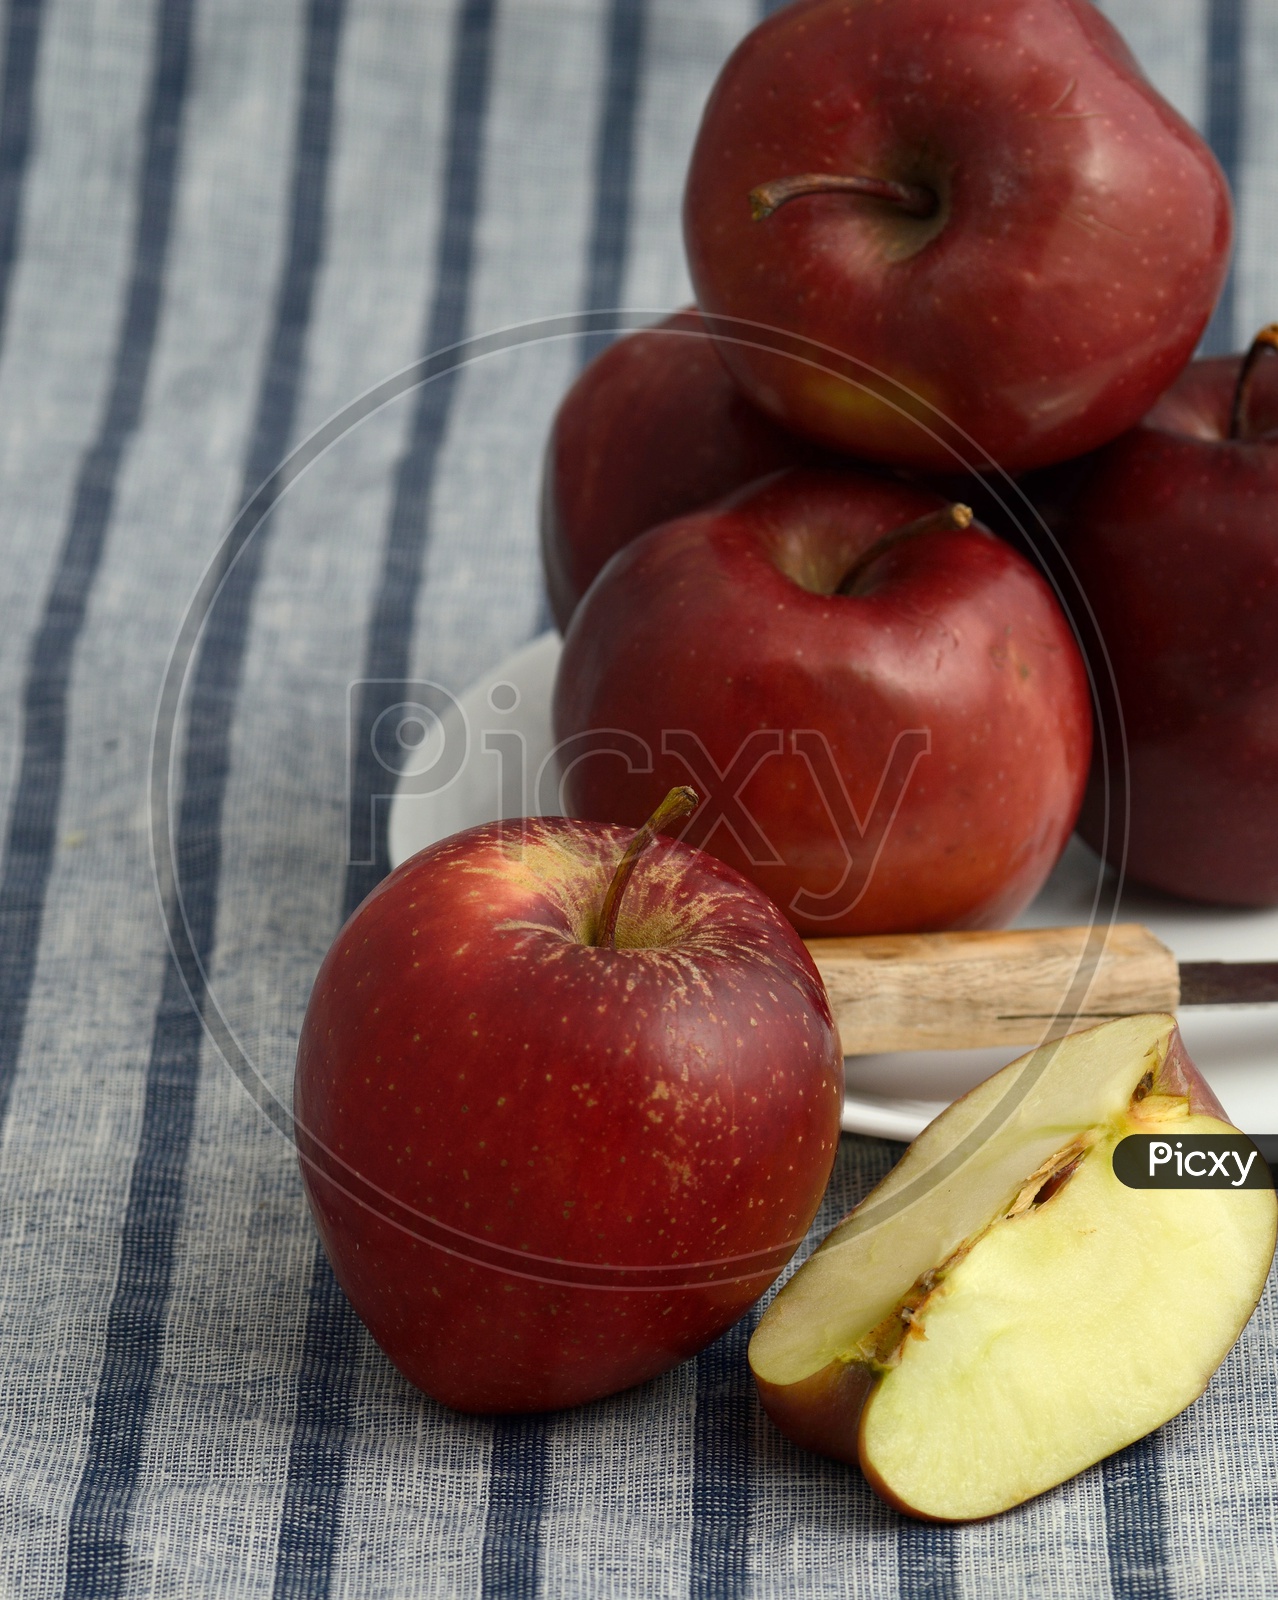 Fresh Red Apples And Slices on a White Plate With Knife  on an Table Cloth Background